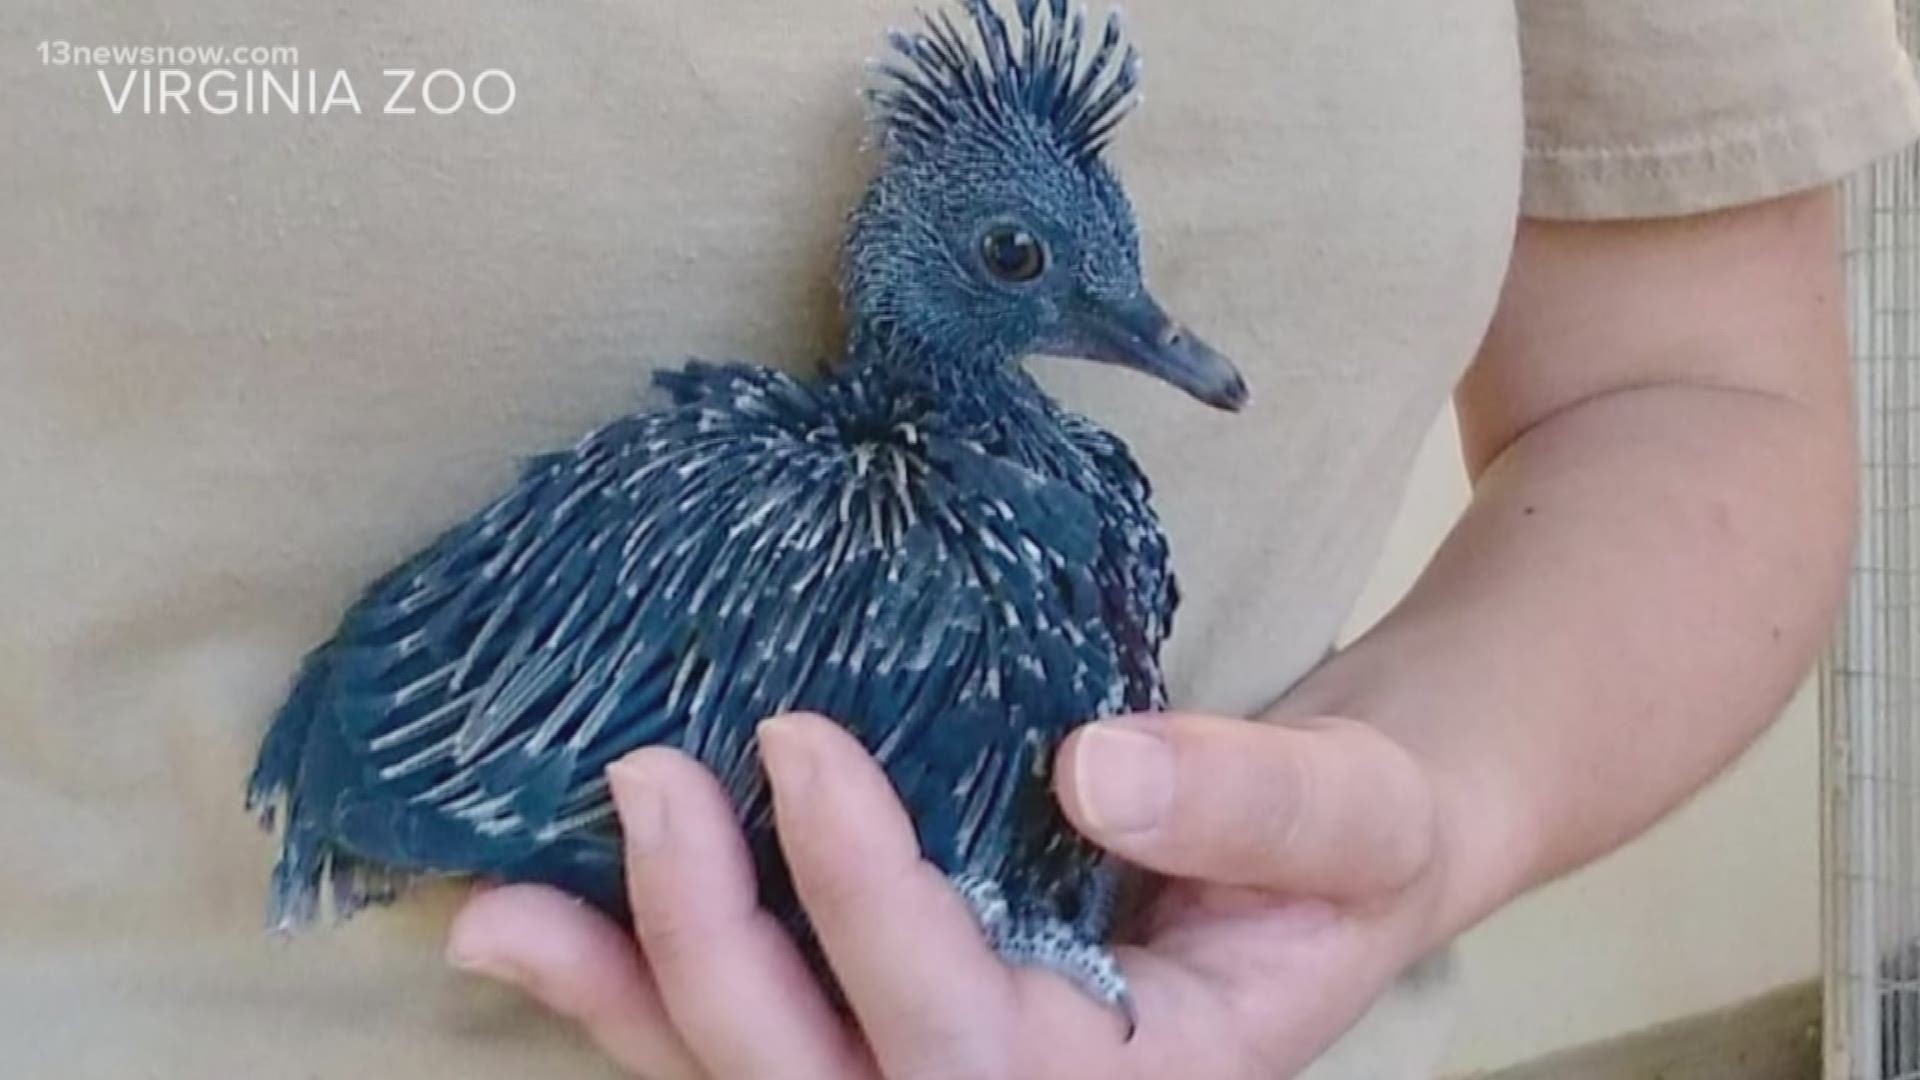 The Virginia Zoo has a new resident, a Victoria crowned pigeon chick. It hatched on March 28.